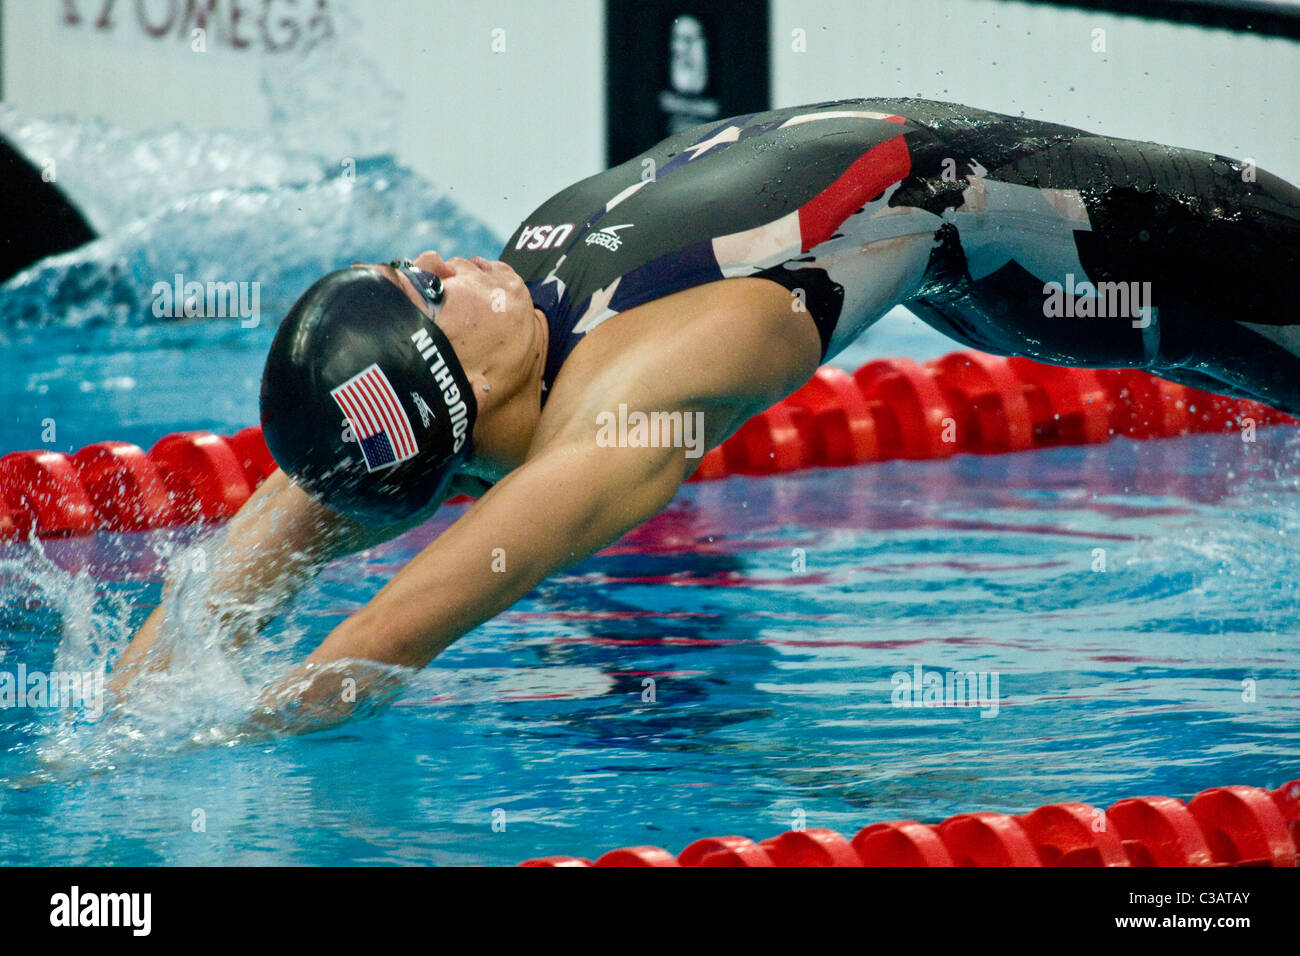 Natalie Coughlin (USA) starting the backstroke leg of the Women's 4X100 medley relay in the swimming competition at the 2008 Oly Stock Photo